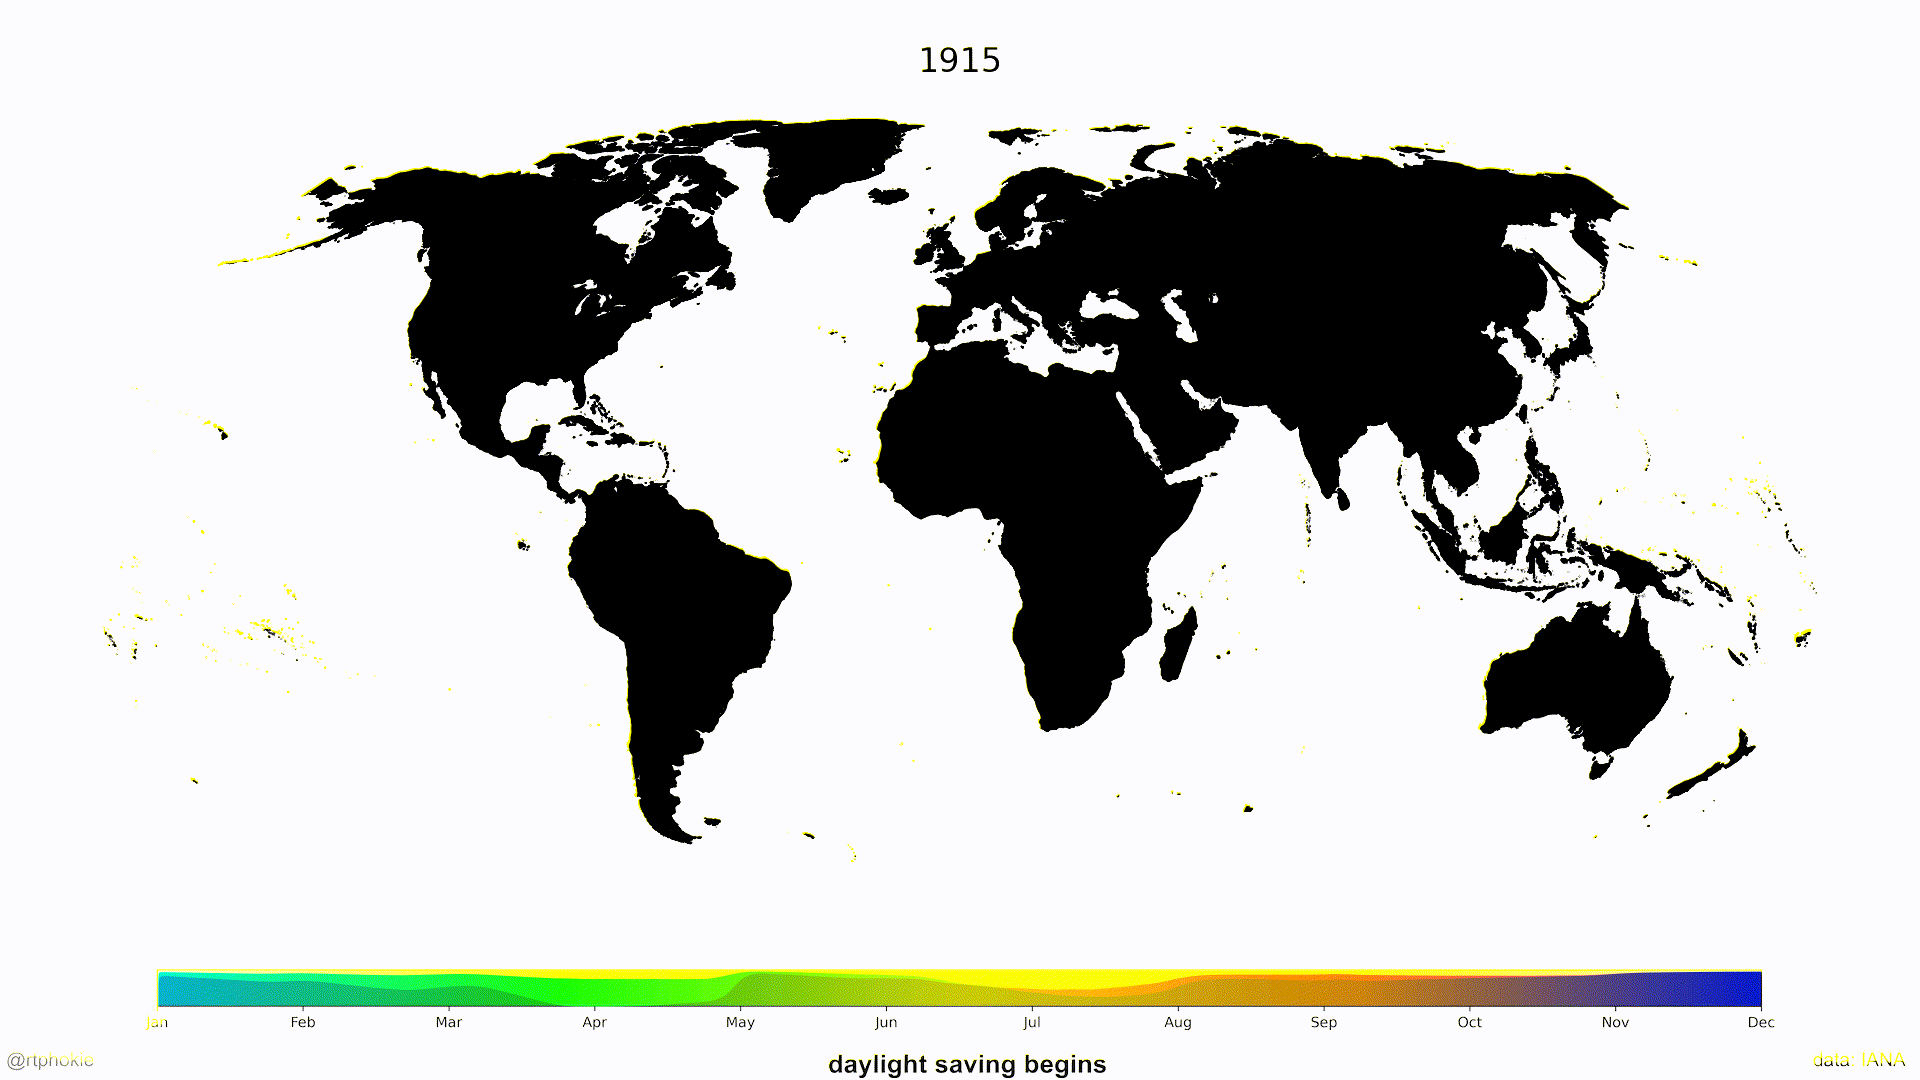 Daylight saving time changes world wide since 1915